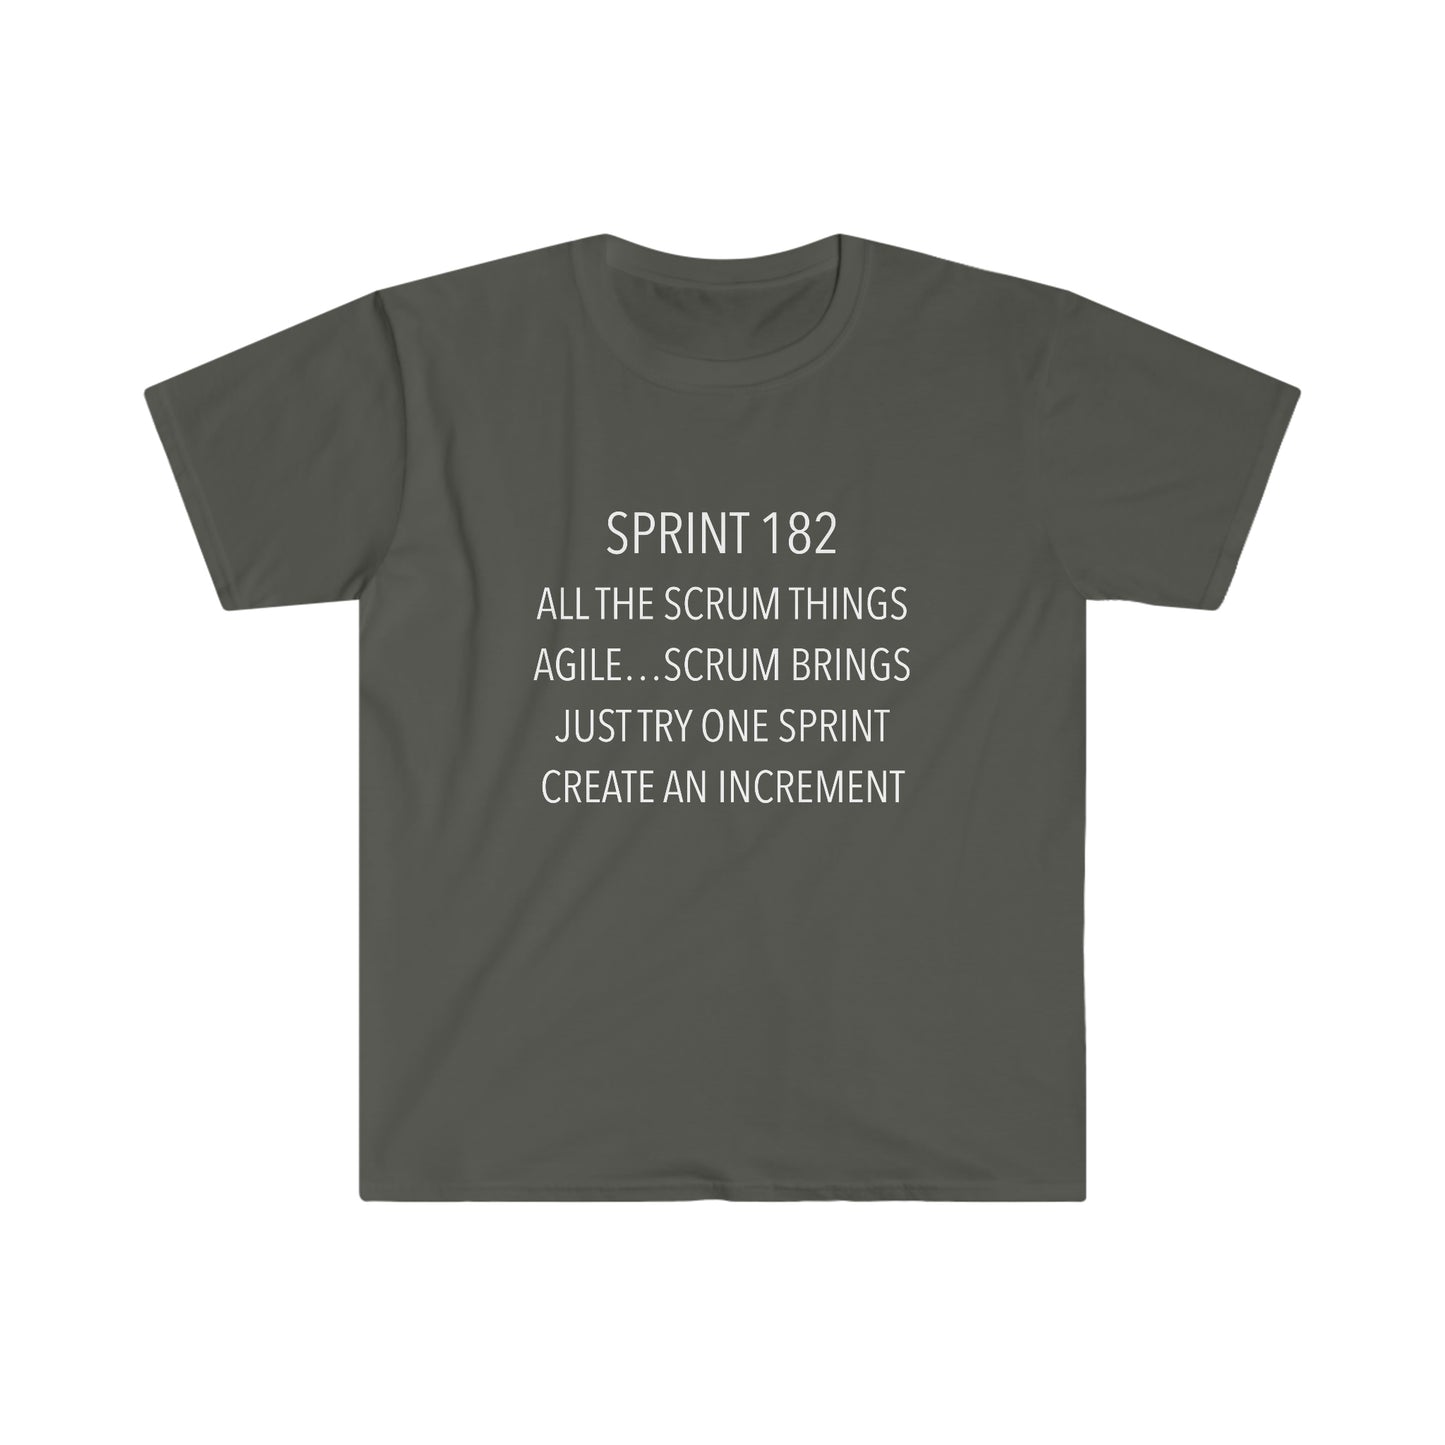 All The Scrum Things - Sprint 182 - T-Shirt by Wisconsin Agility featuring Agile Songs by Chad Beier